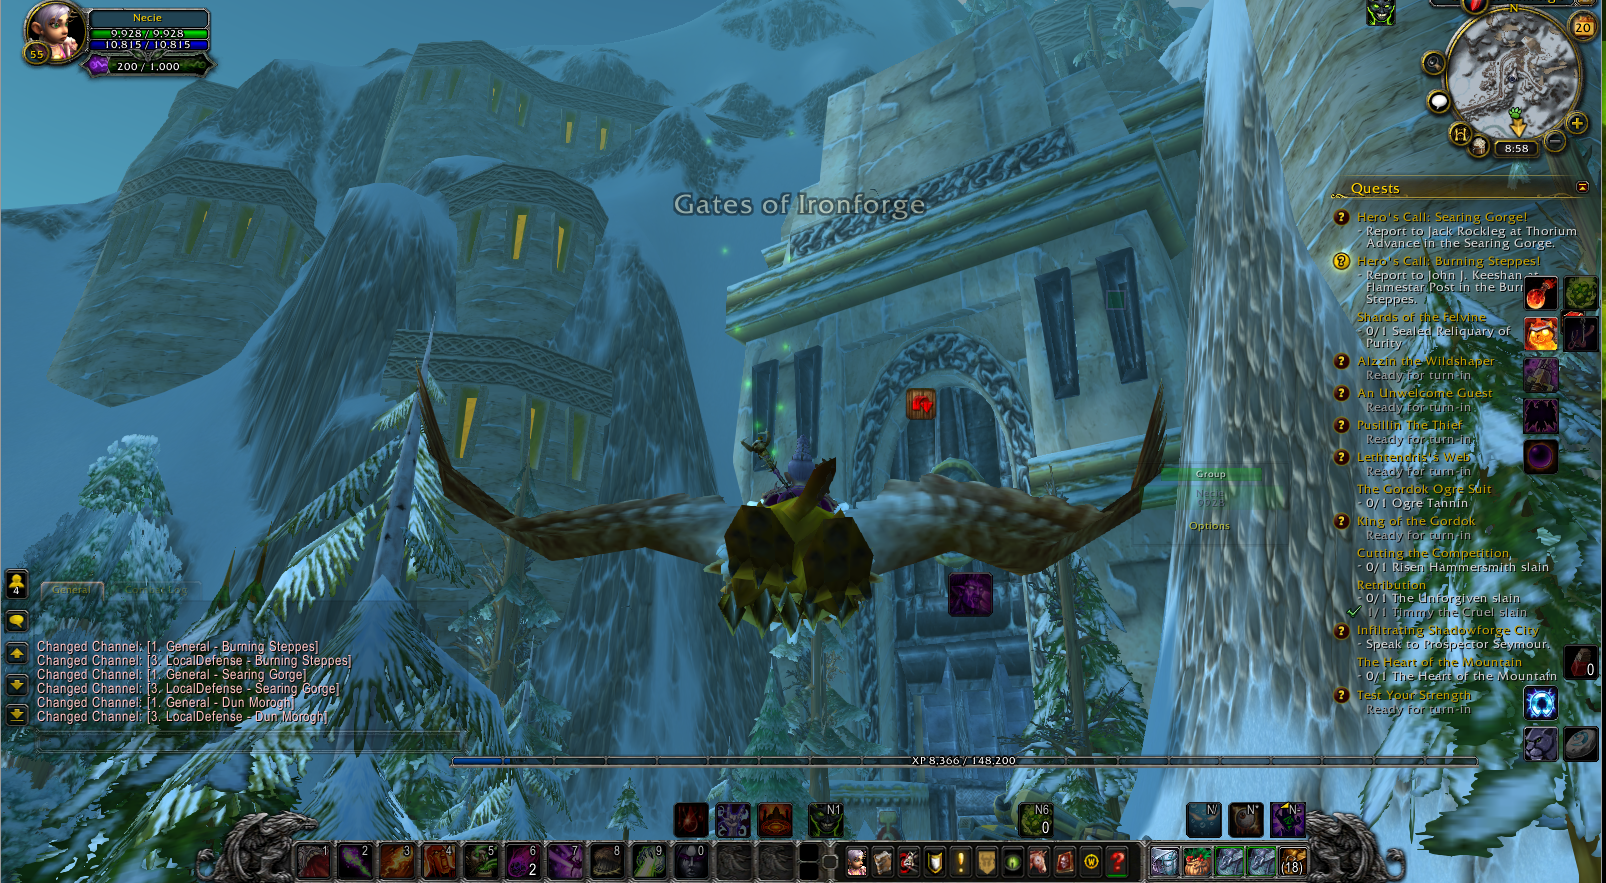 Necie flying into Ironforge. This shows a custom user interface (UI). Image by Jana Allmand-Zeman